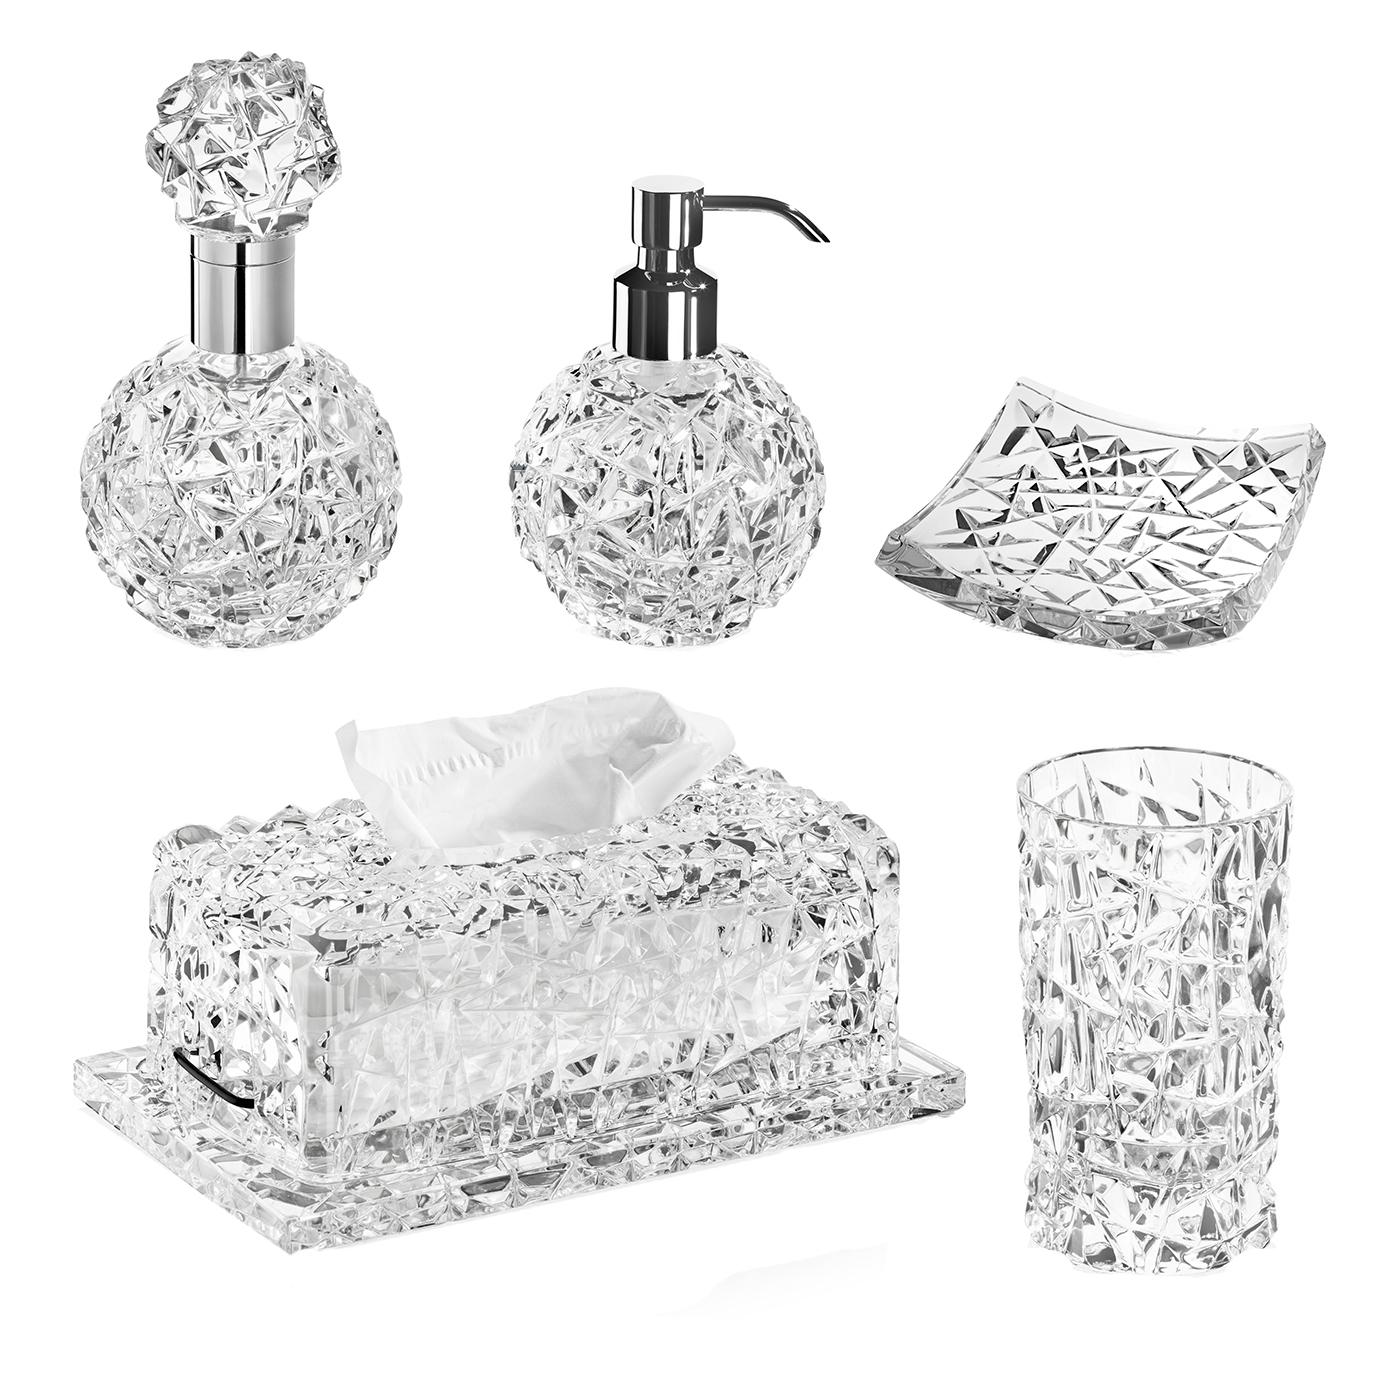 This precious and sophisticated set comprises five pieces that will infuse elegance in any bathroom. Functional and decorative, this set is made of transparent glass adorned with a superb textural decoration, and is part of the Spa Sinfonia. It